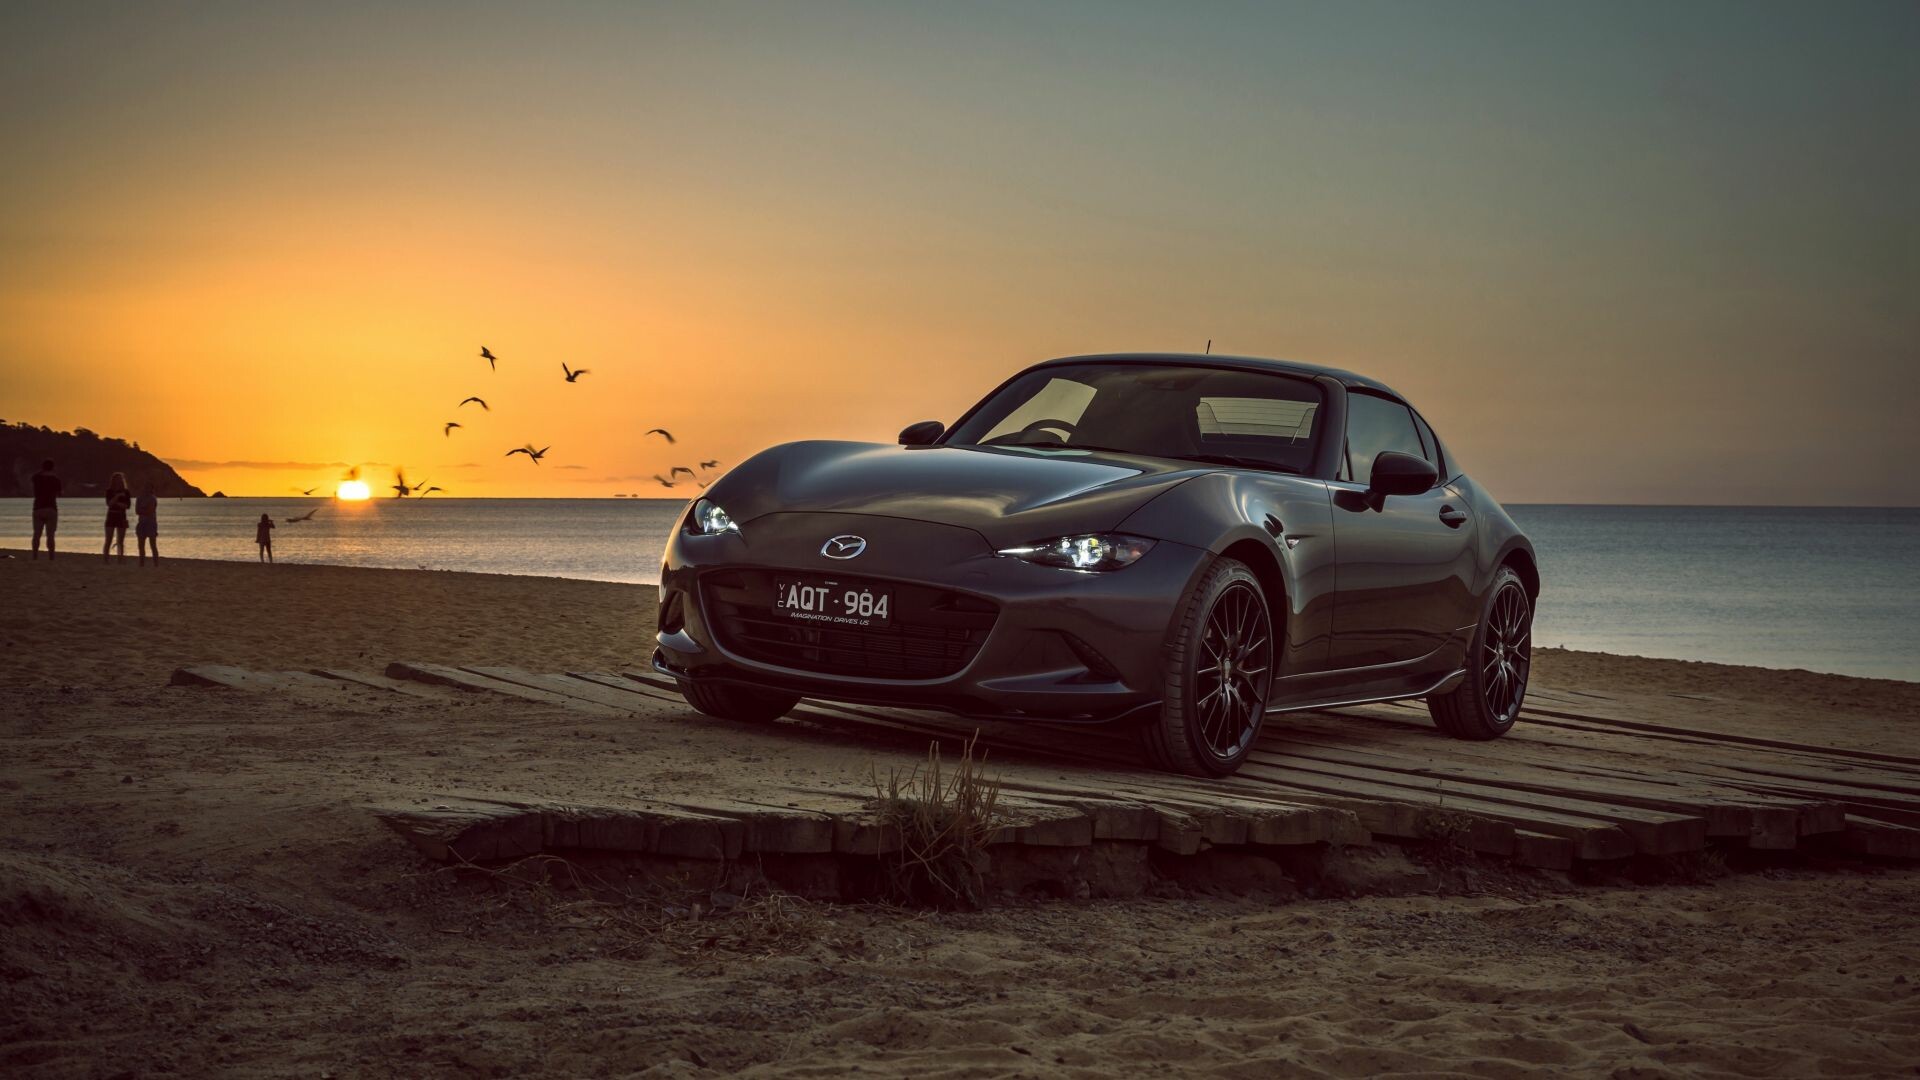 Mazda: MX-5, A lightweight two-passenger roadster sports car. 1920x1080 Full HD Background.